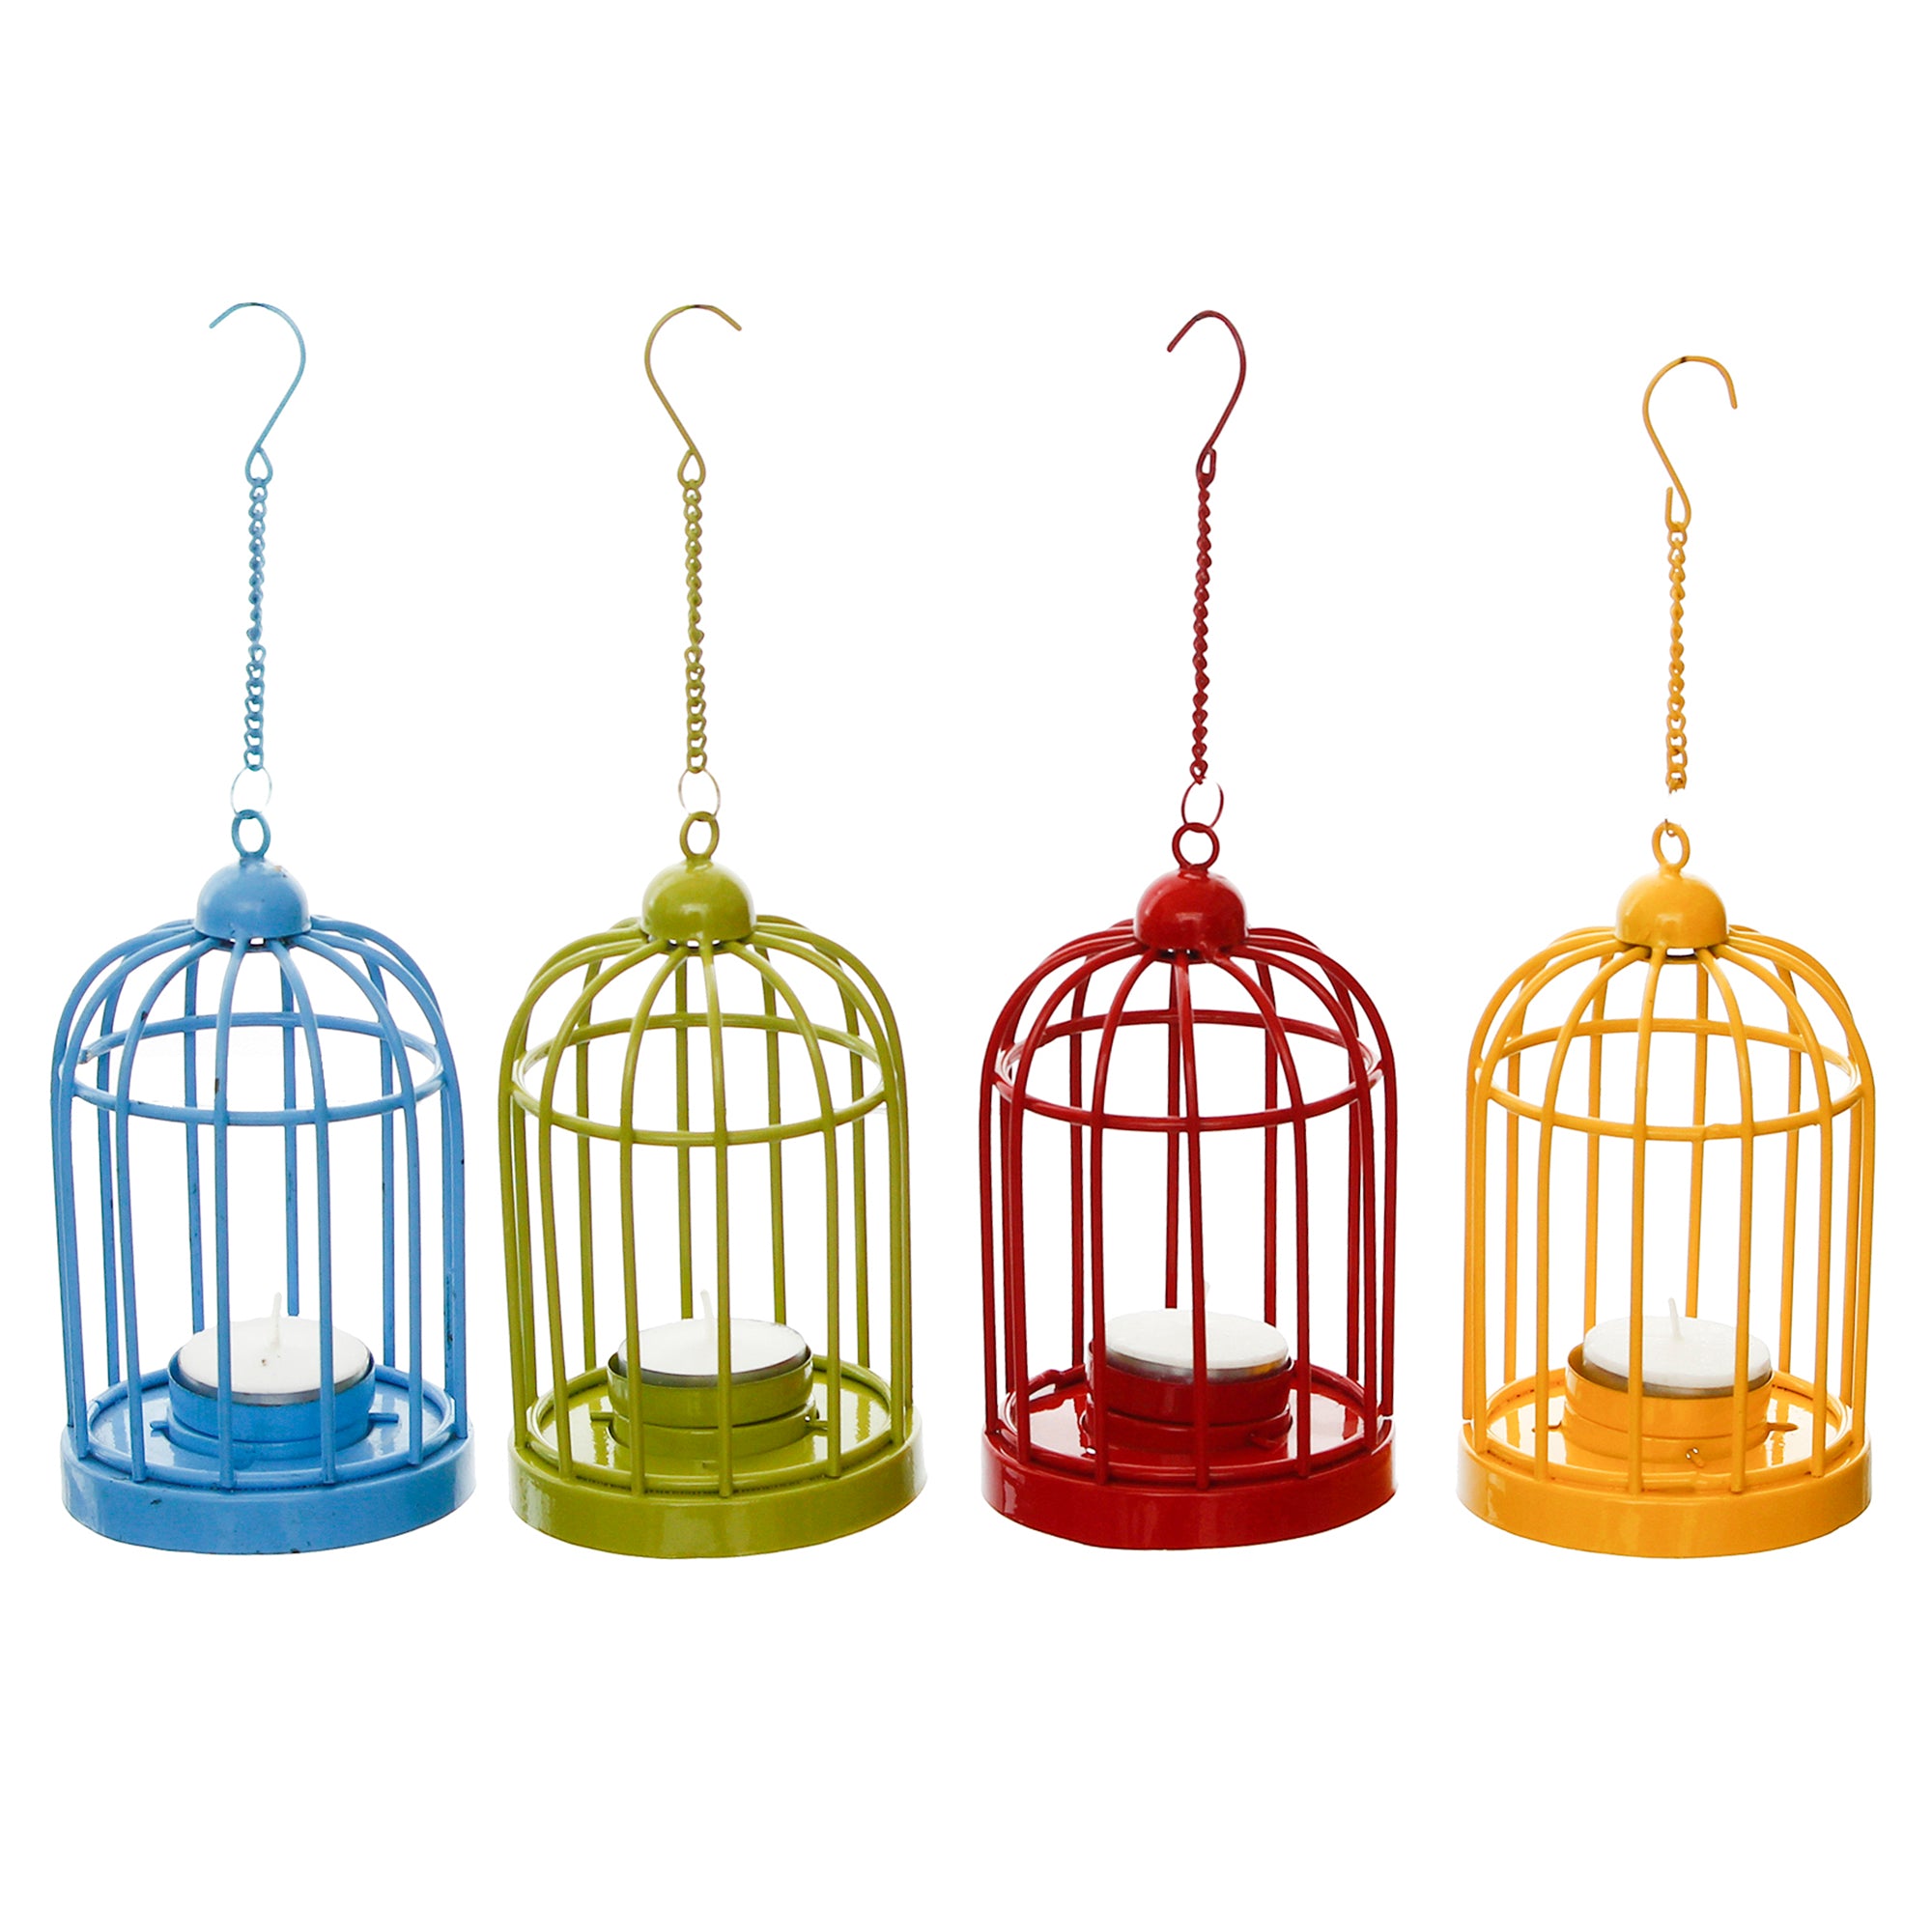 Set of 4 Colors Iron Cage Tea Light candle Holder With Hanging Chain(Blue, Green, Yellow, Red) 2